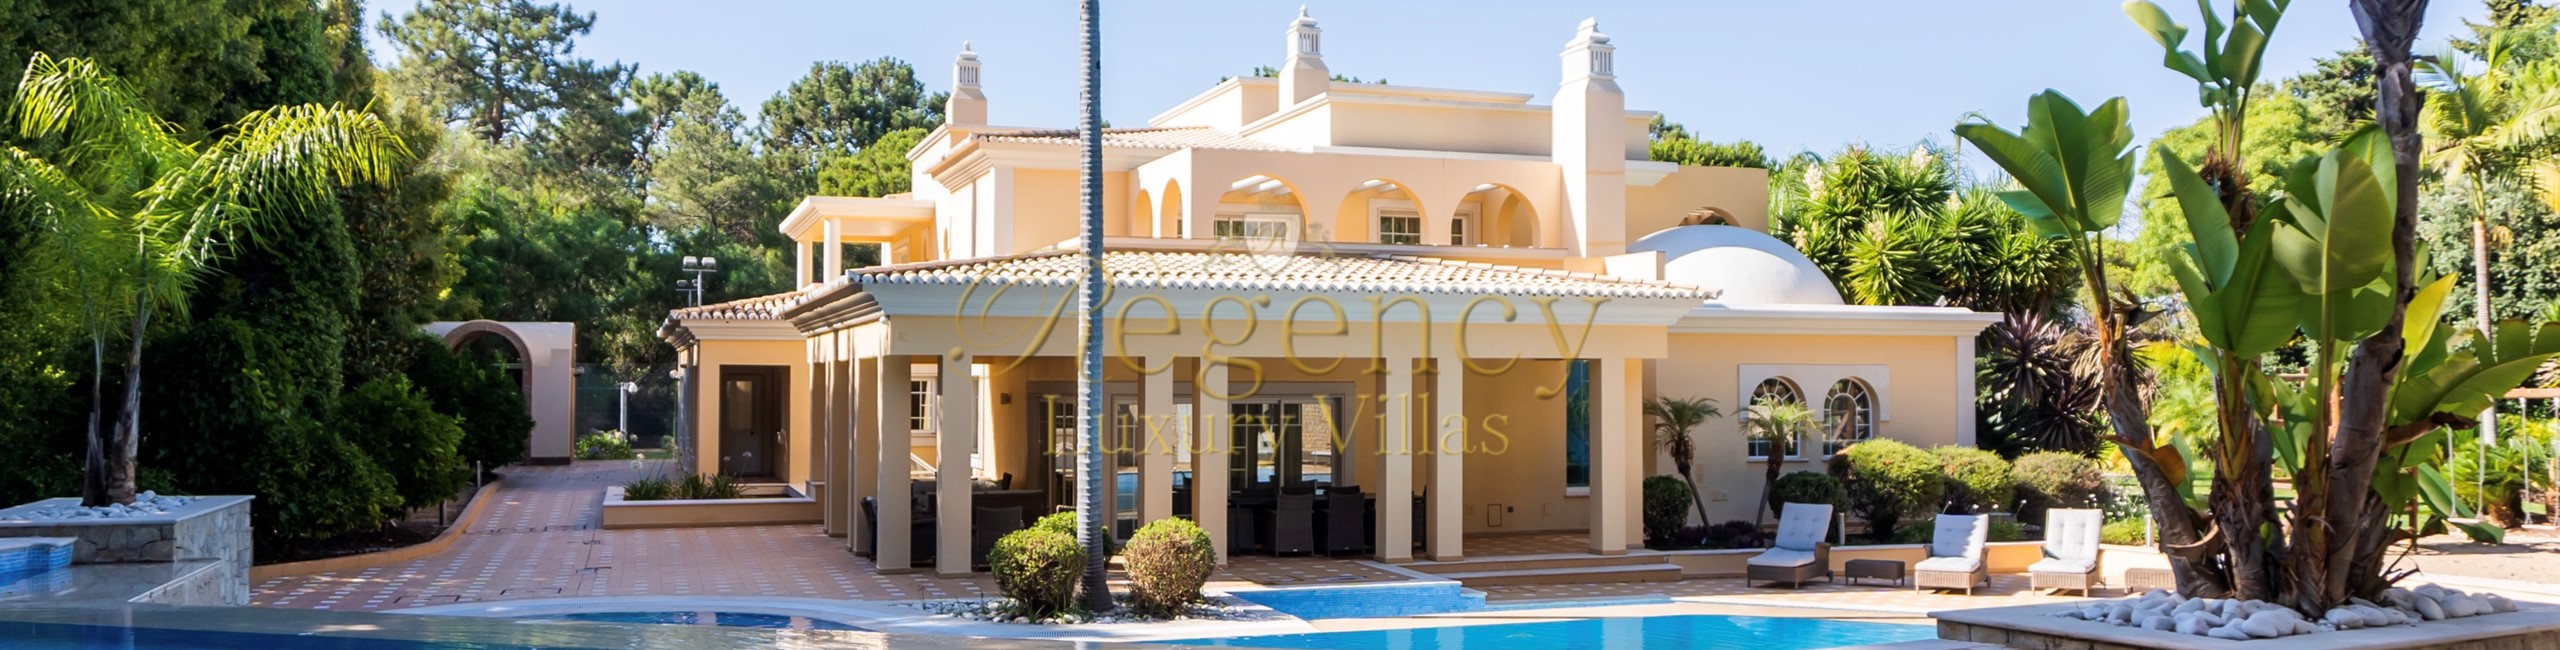 Holiday Villa To Rent In Quinta Do Lago